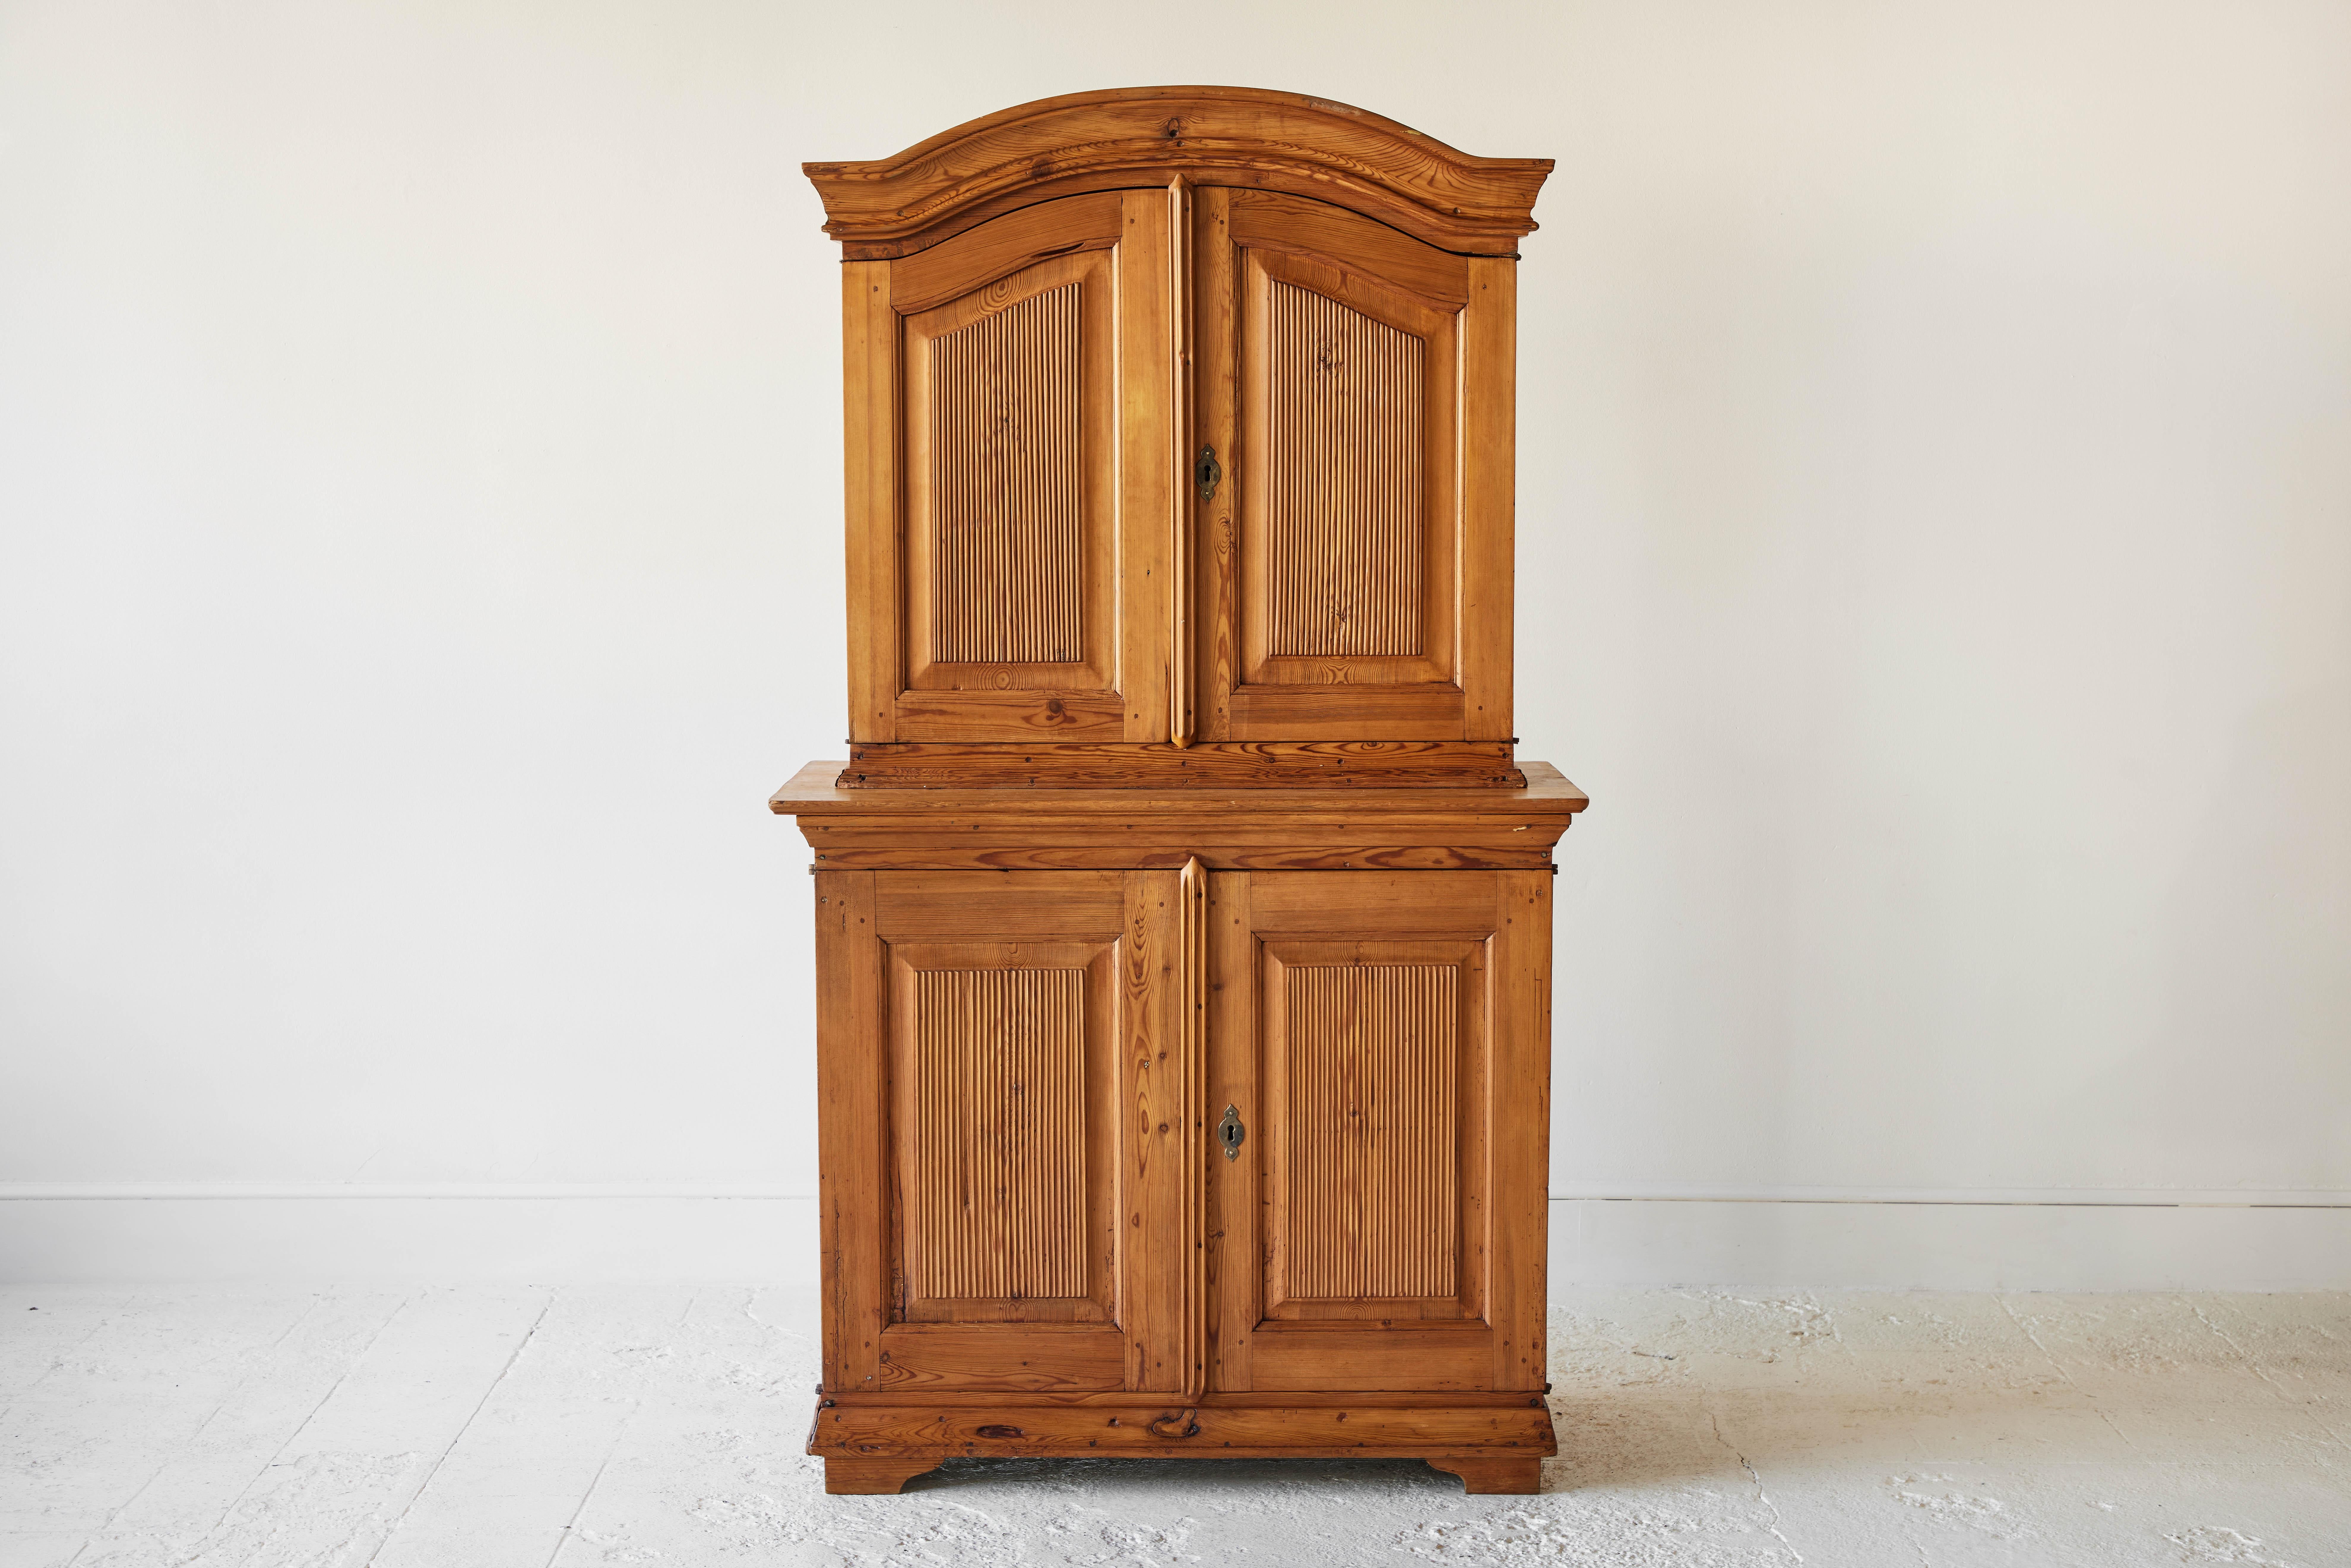 Swedish pine four door hutch with arched top. Interior is painted a rustic green.